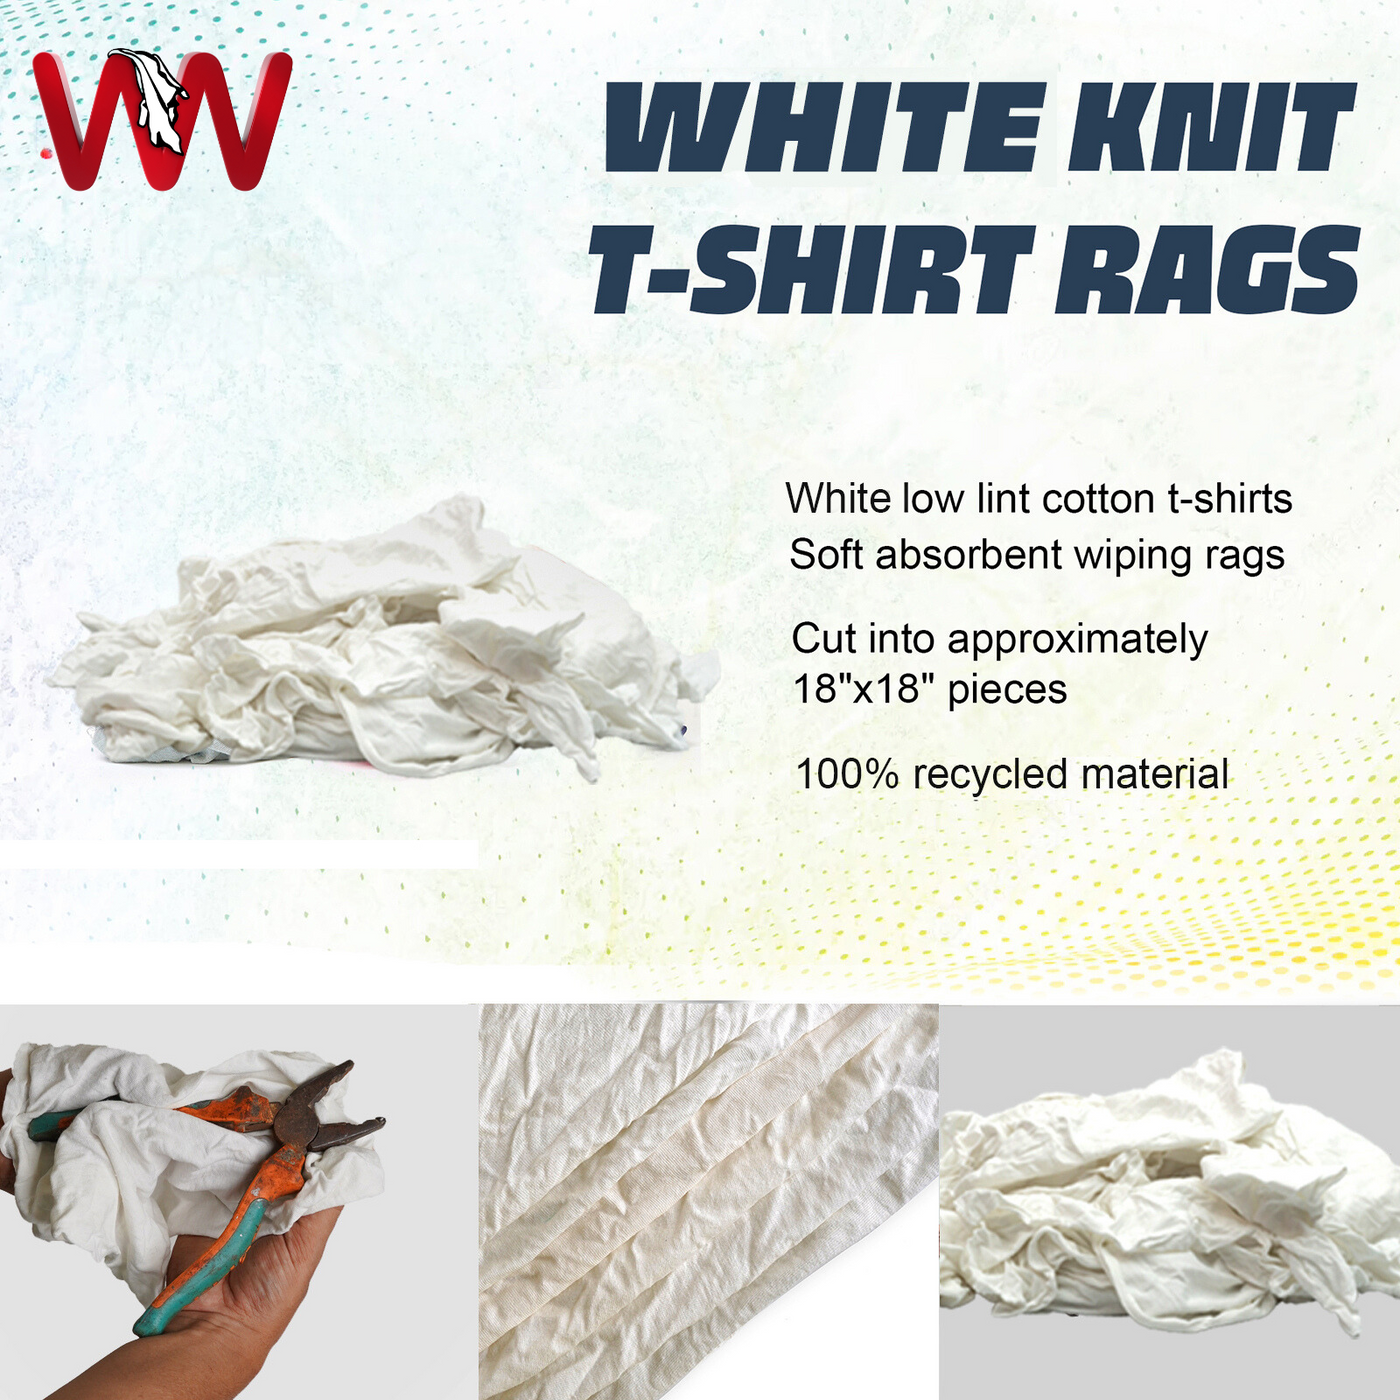 SupremePlus Premium White Knit Cotton T-Shirt Cloth Wiping Rags - Shop  Cleaning Tshirt Cloths in a (1 Pound Bag), Staining & Finishing Rag for  Auto